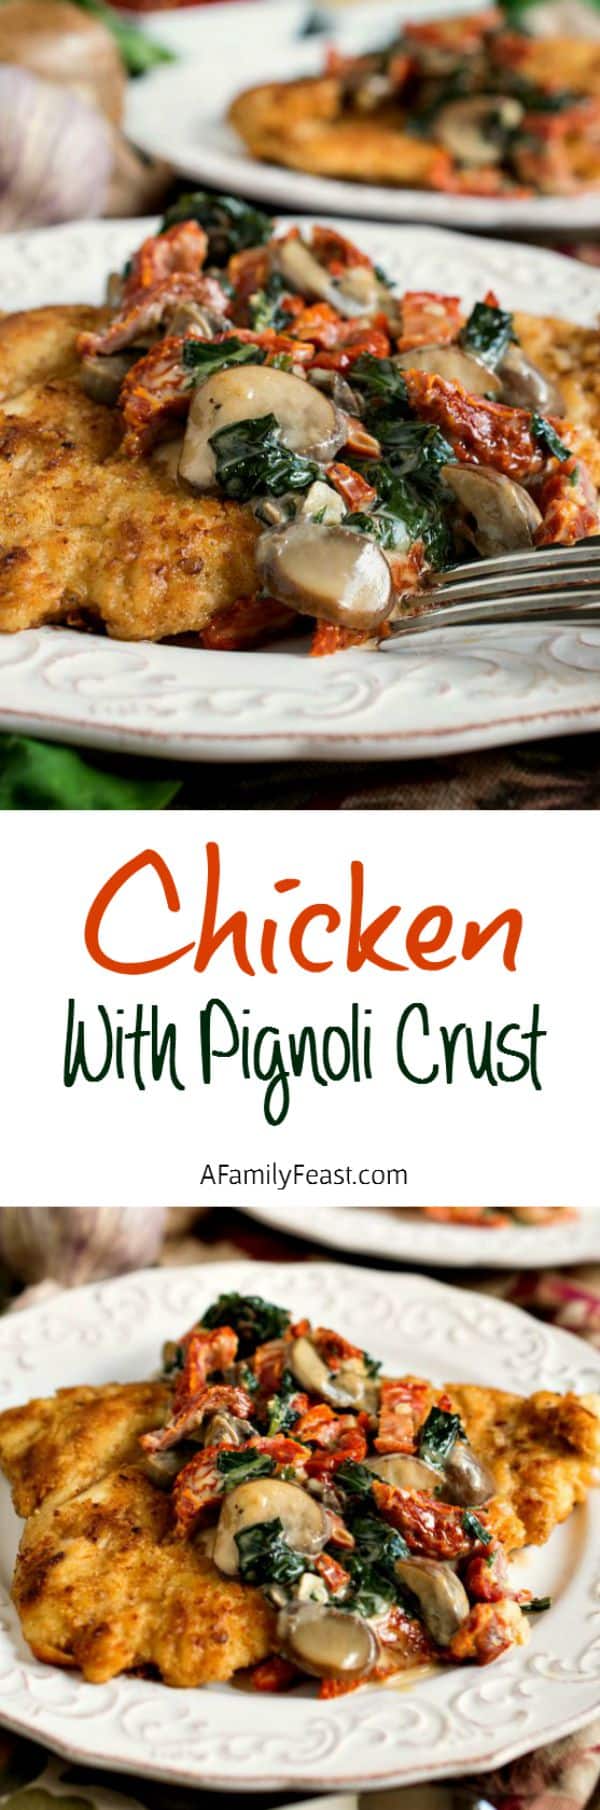 Chicken with Pignoli Crust - A customer favorite at the East Side Grill in Northampton, Massachusetts - this recipe has been on the menu for years!